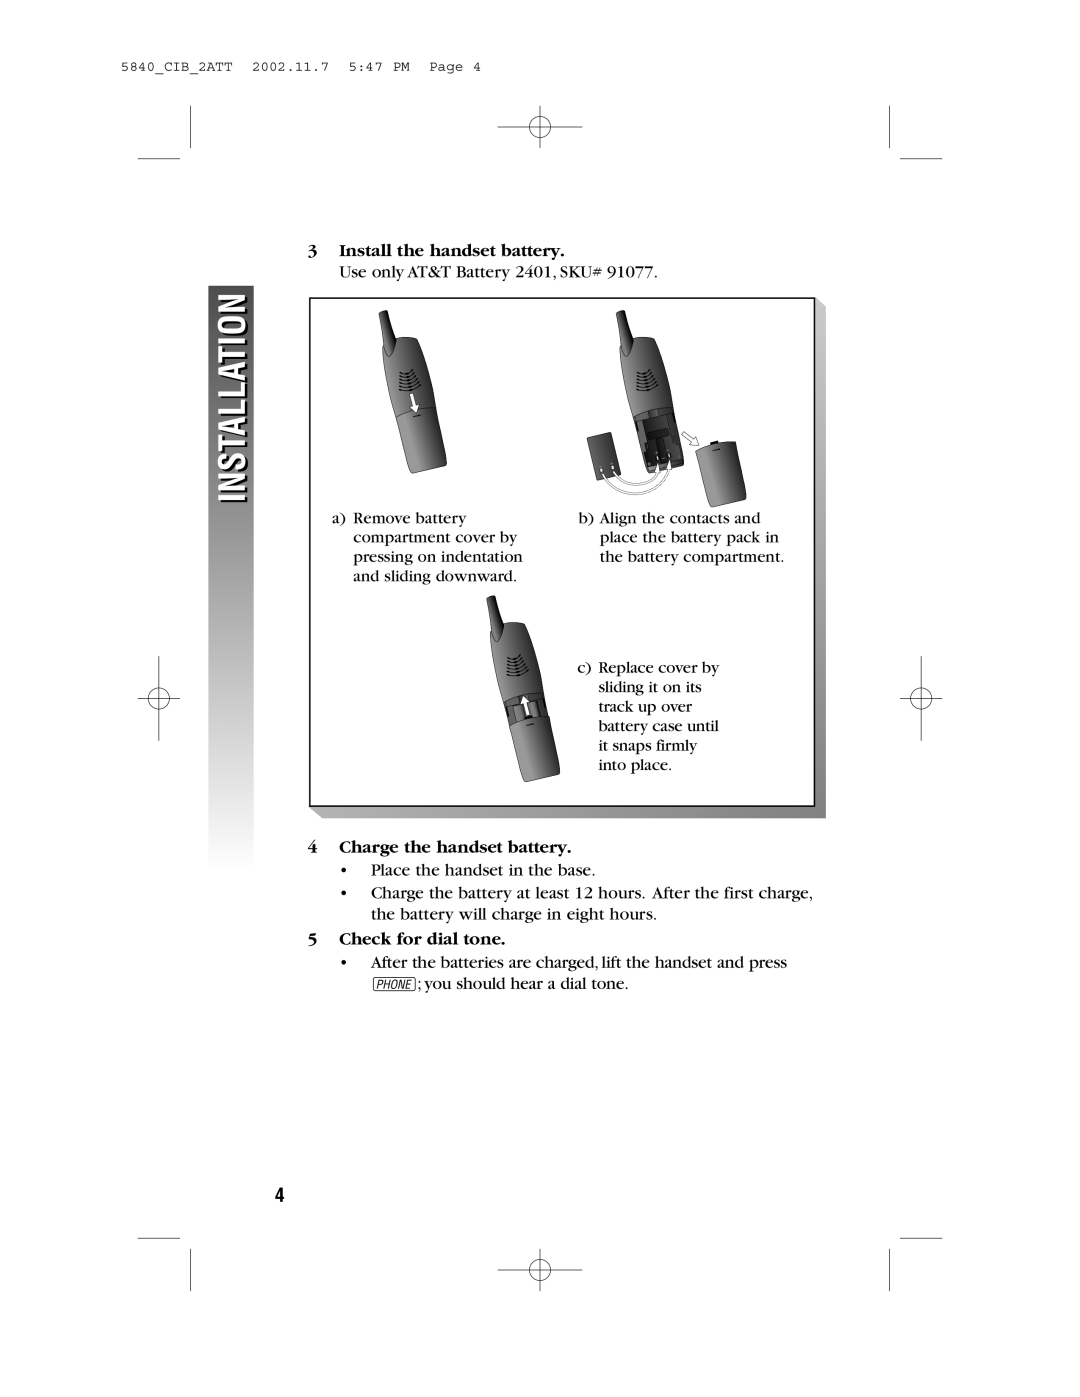 AT&T 5840 user manual Installation, Install the handset battery, Charge the handset battery, Check for dial tone 